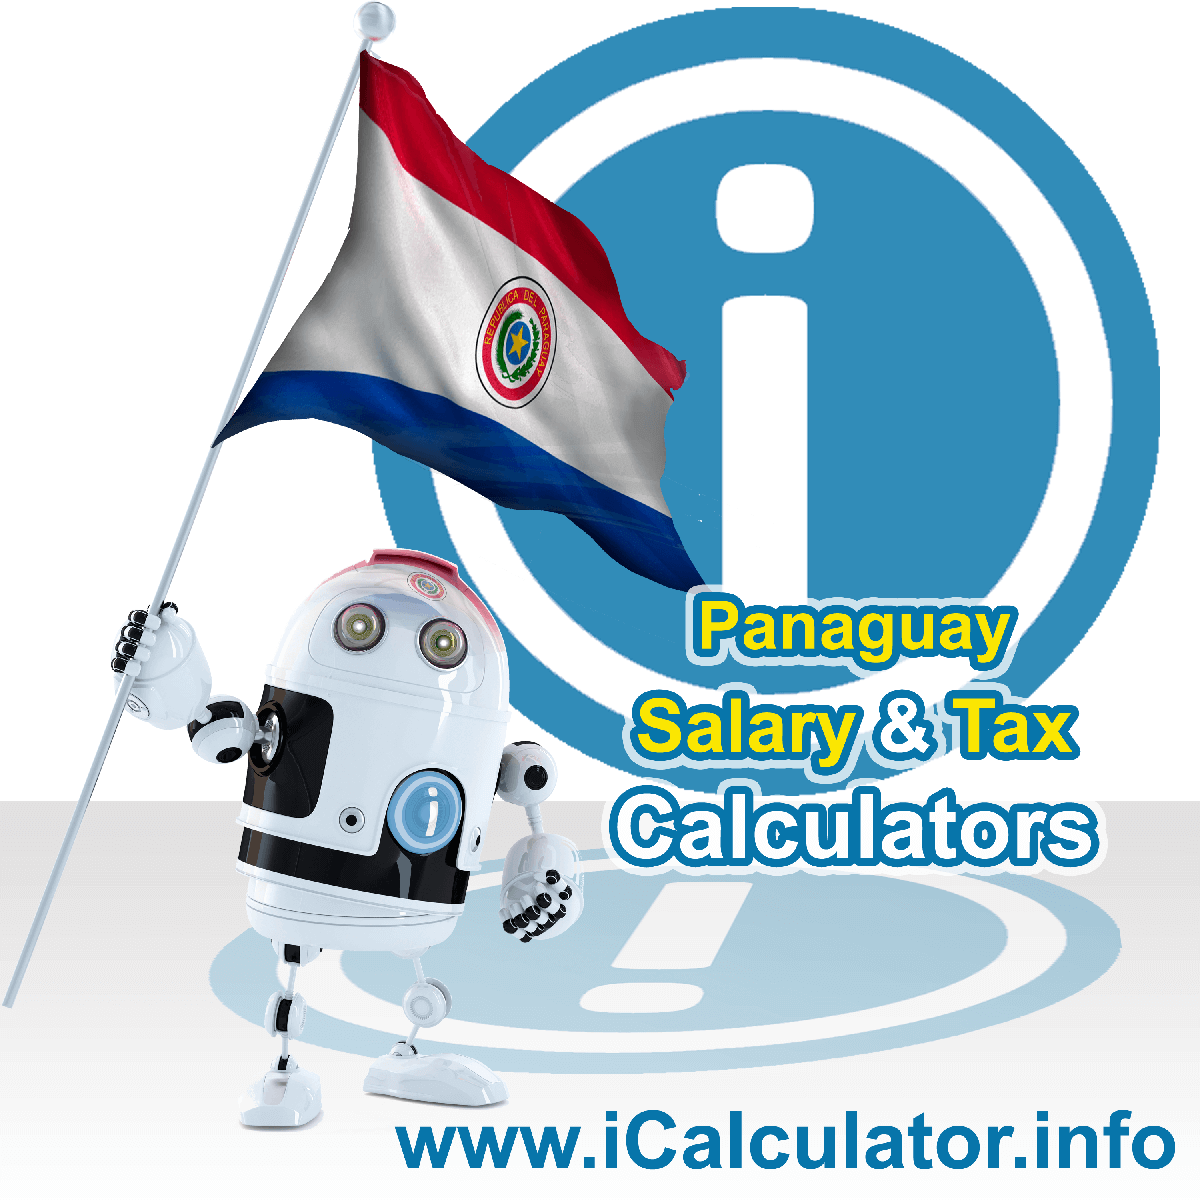 Paraguay Salary Calculator. This image shows the Paraguayese flag and information relating to the tax formula for the Paraguay Tax Calculator